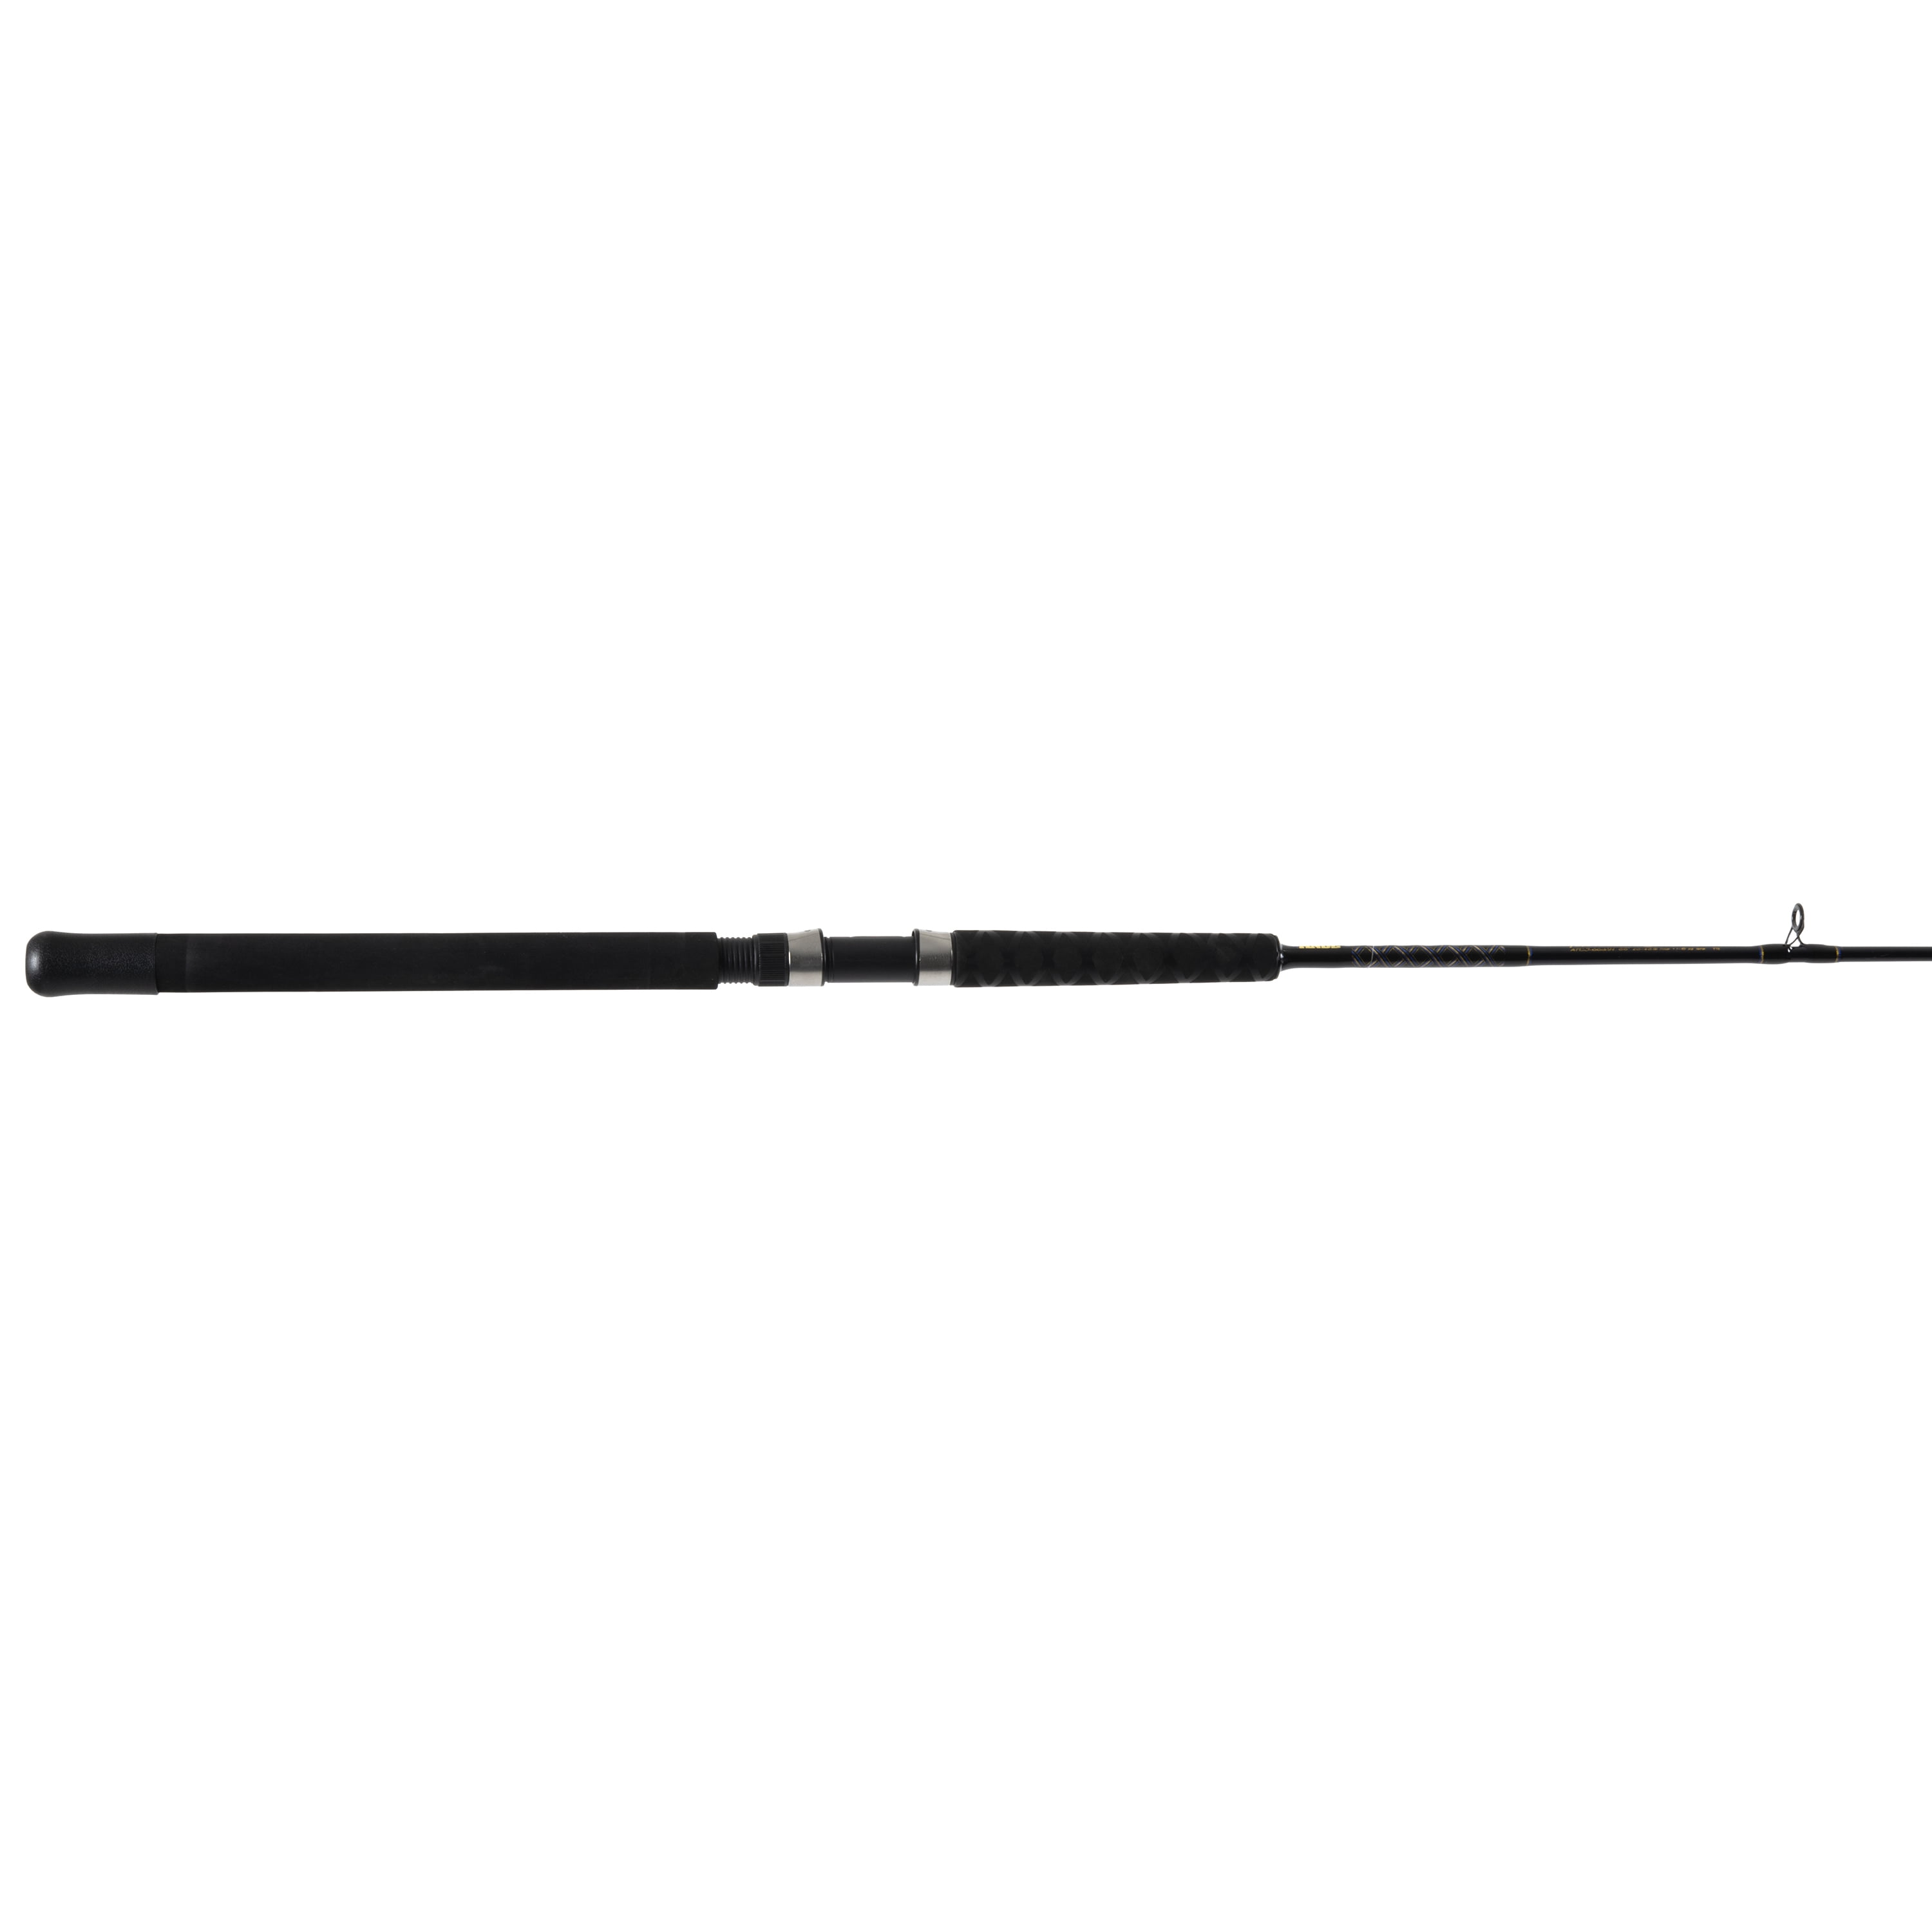 ANDE Tournament ATCJ661MH 6 Ft. 6 In. Medium Heavy Jig Casting Rod 